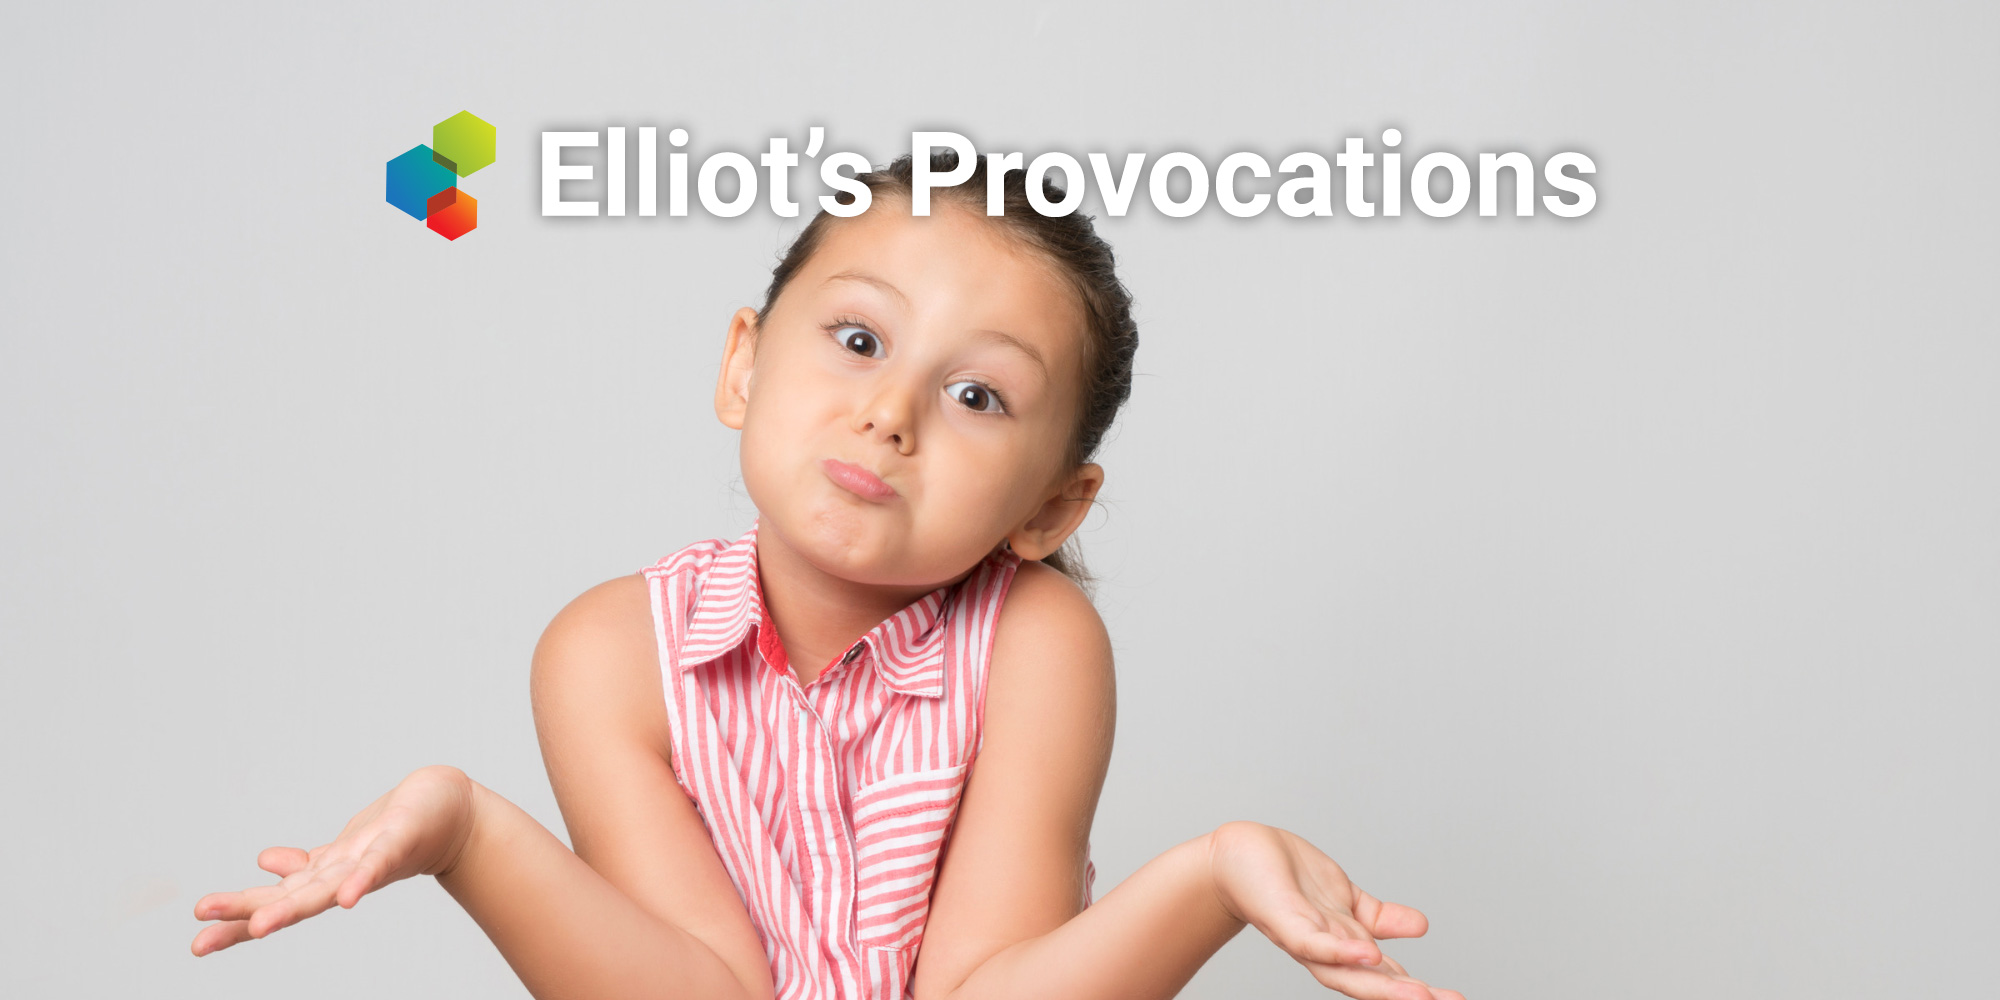 Elliot's Provocations: Voter Support for Child Care Is Sky-High